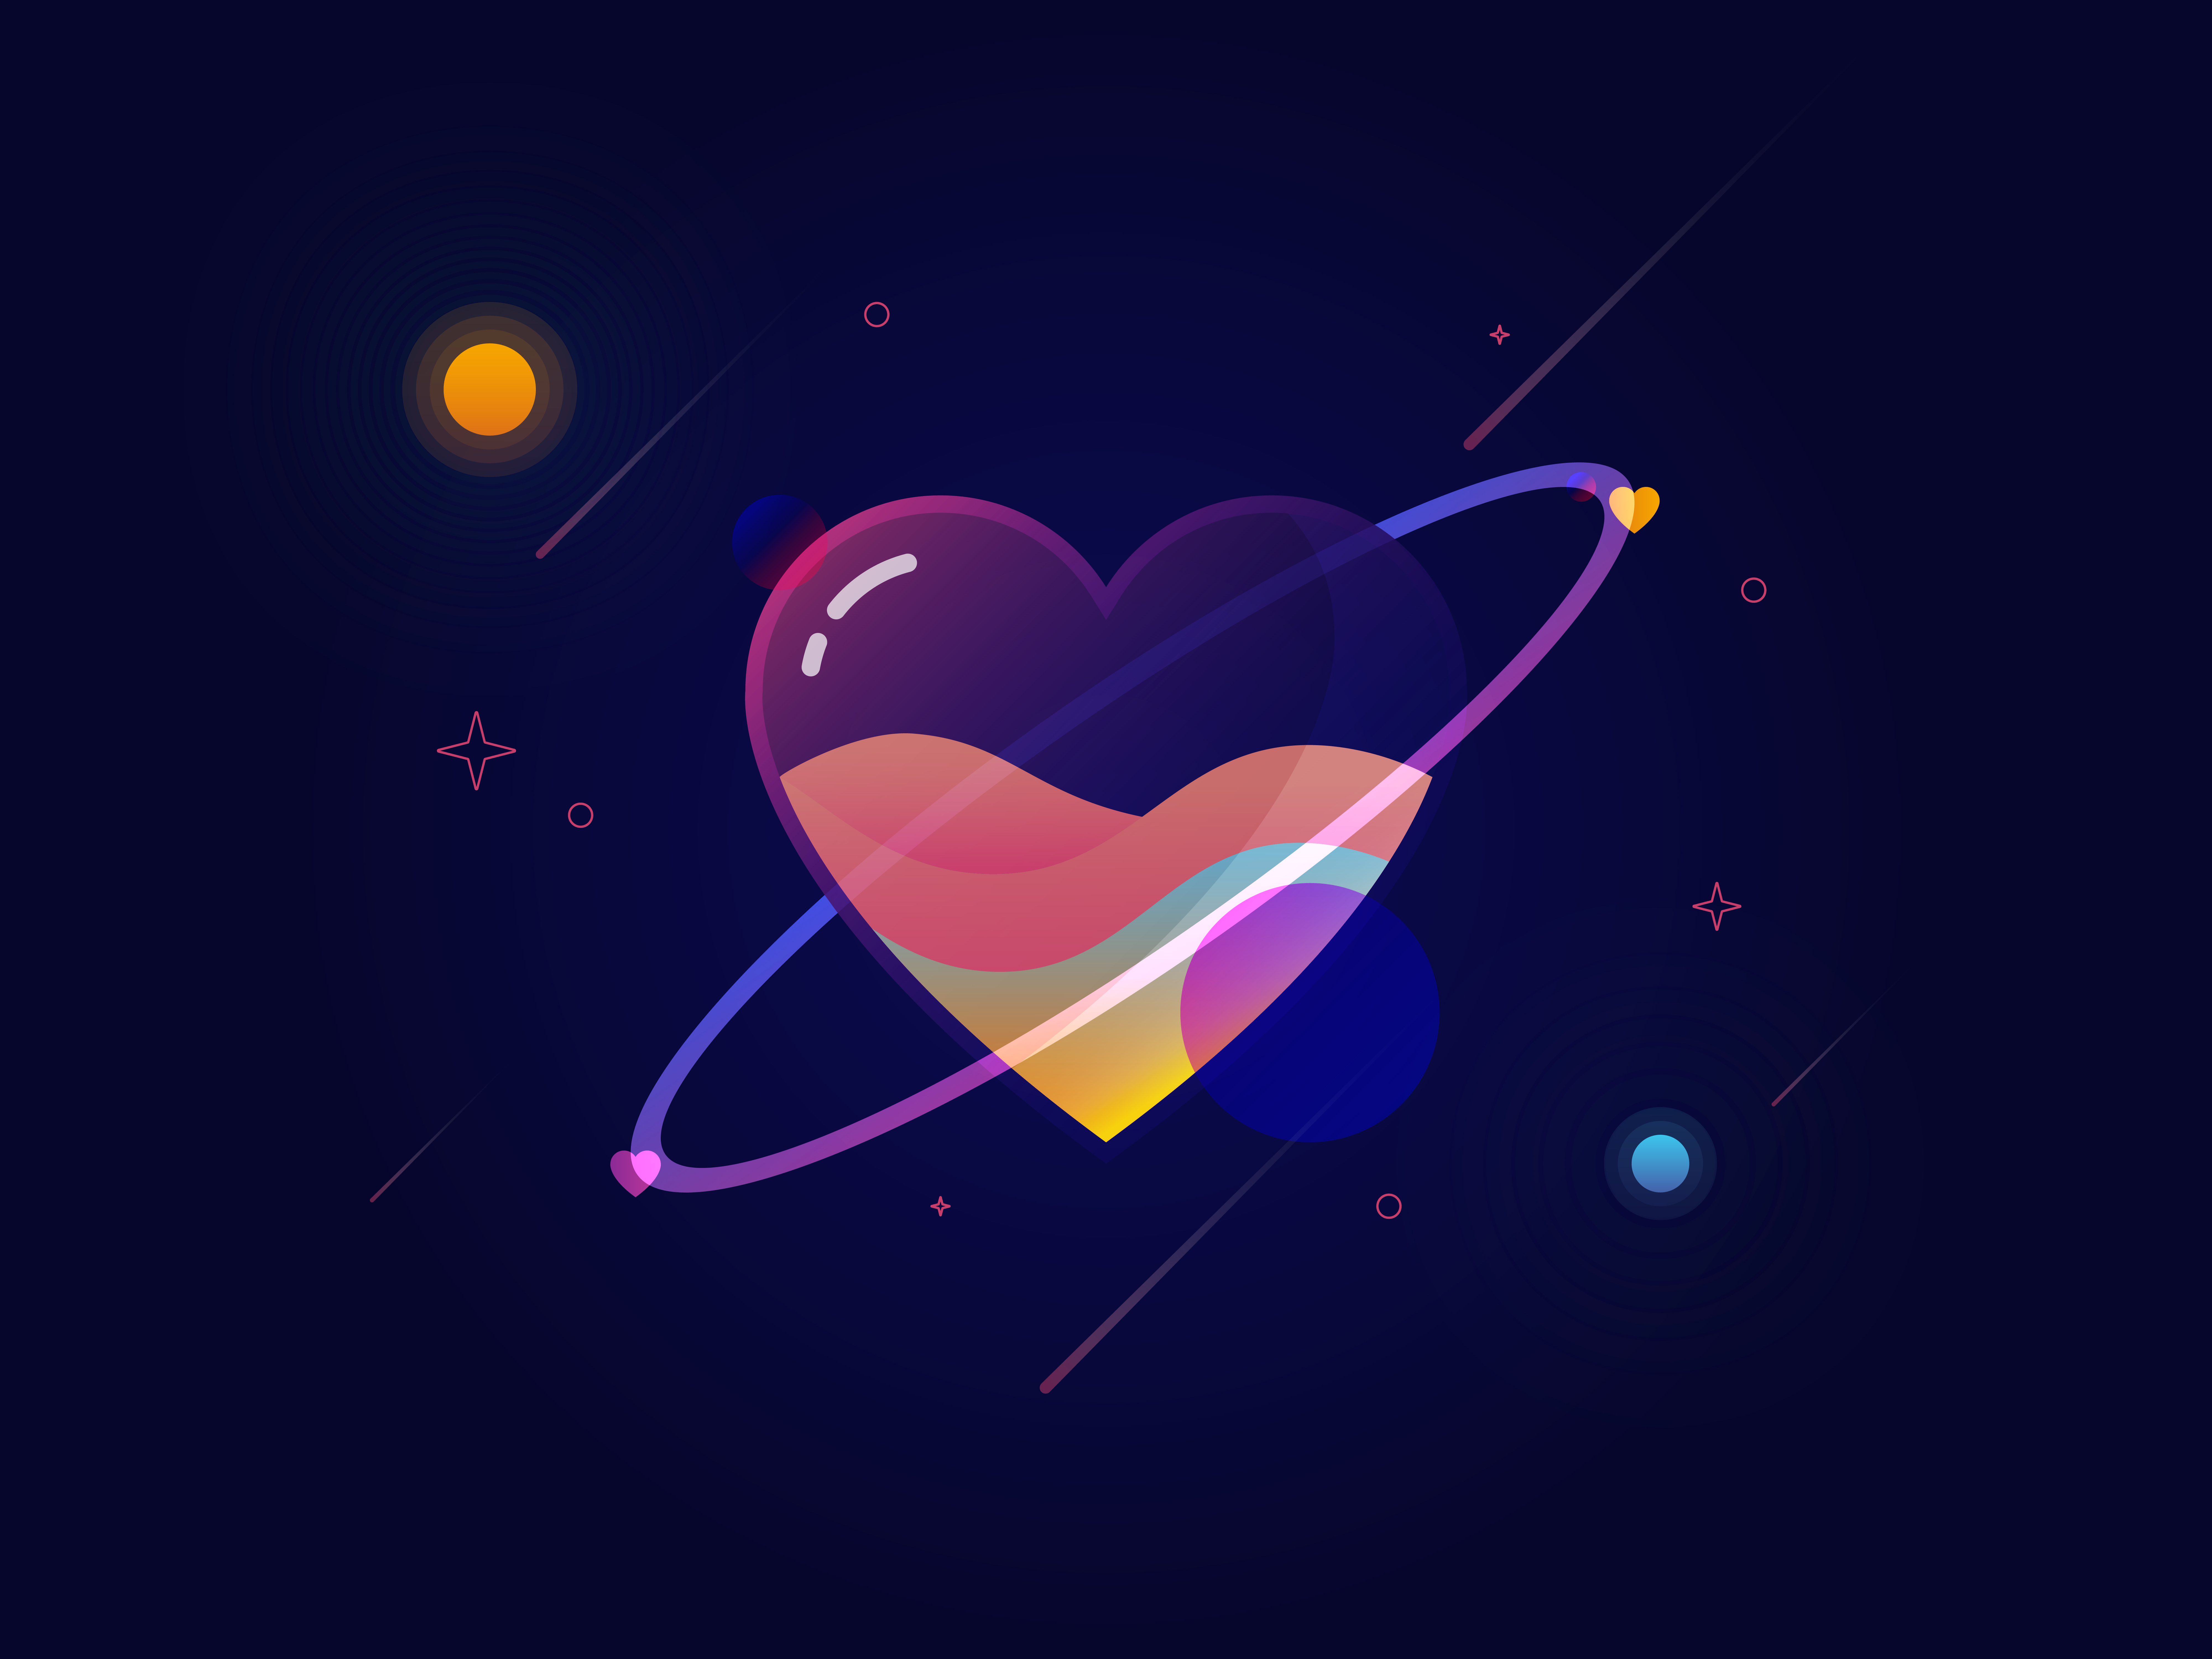 Heart Planet by Nara Xyln on Dribbble